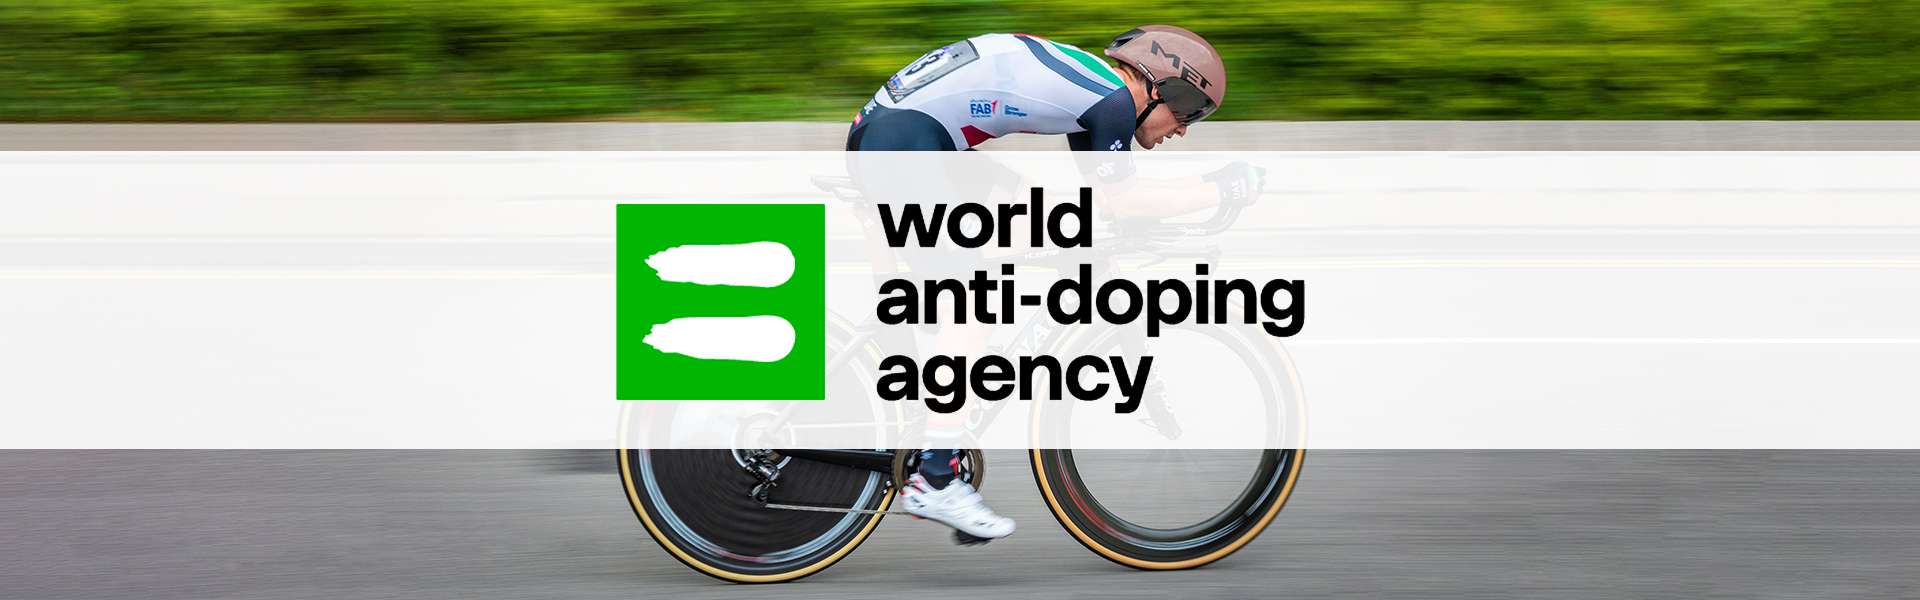 WADA, the World Anti-Doping Agency - actions and directives